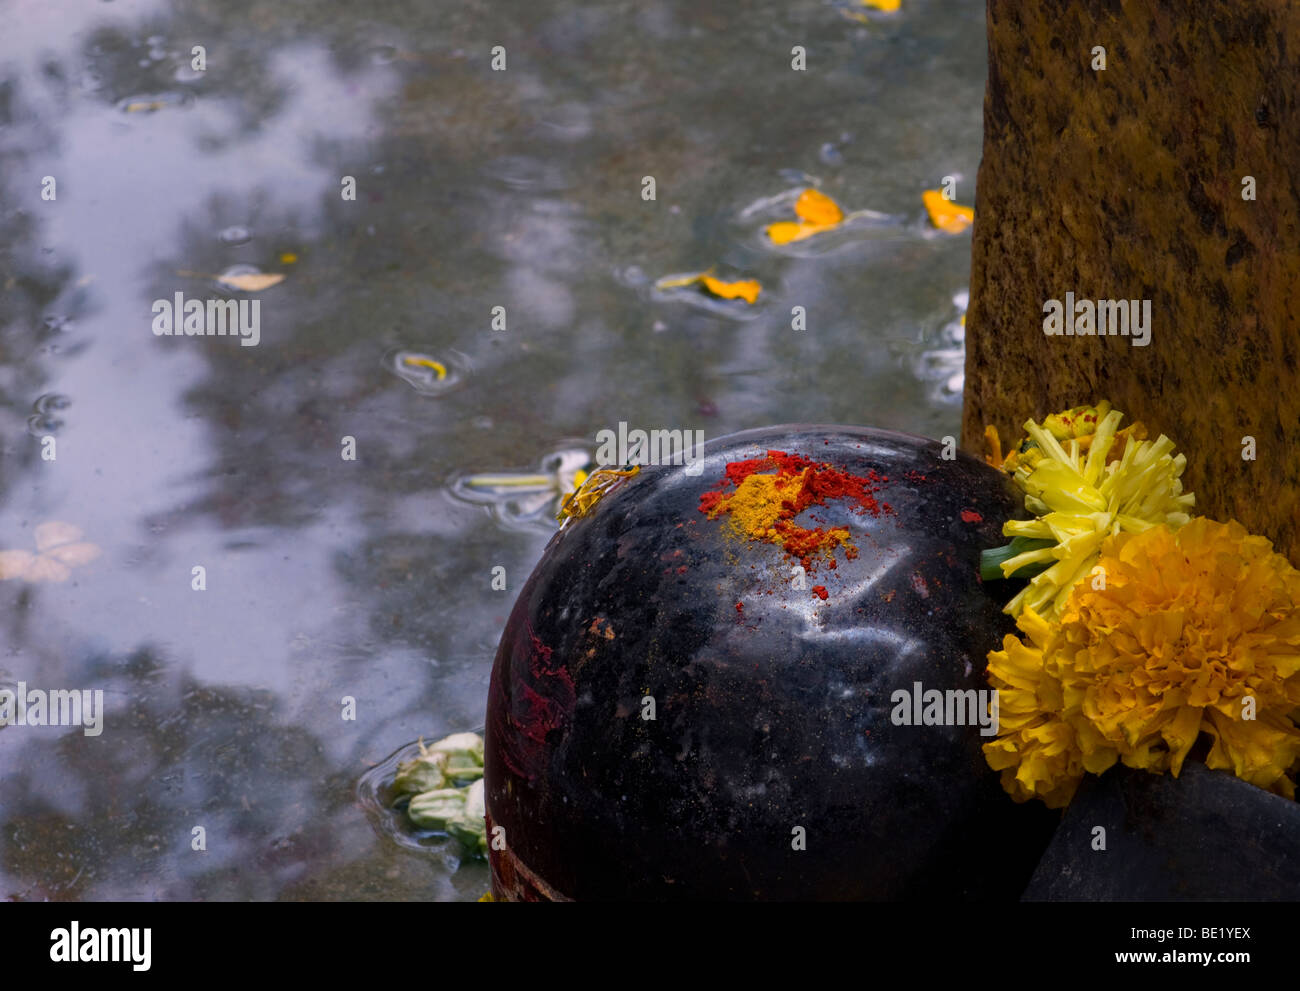 300 yr old Shiva lingum with red and yellow sacred powder next to a stone with marigold  offerings Stock Photo